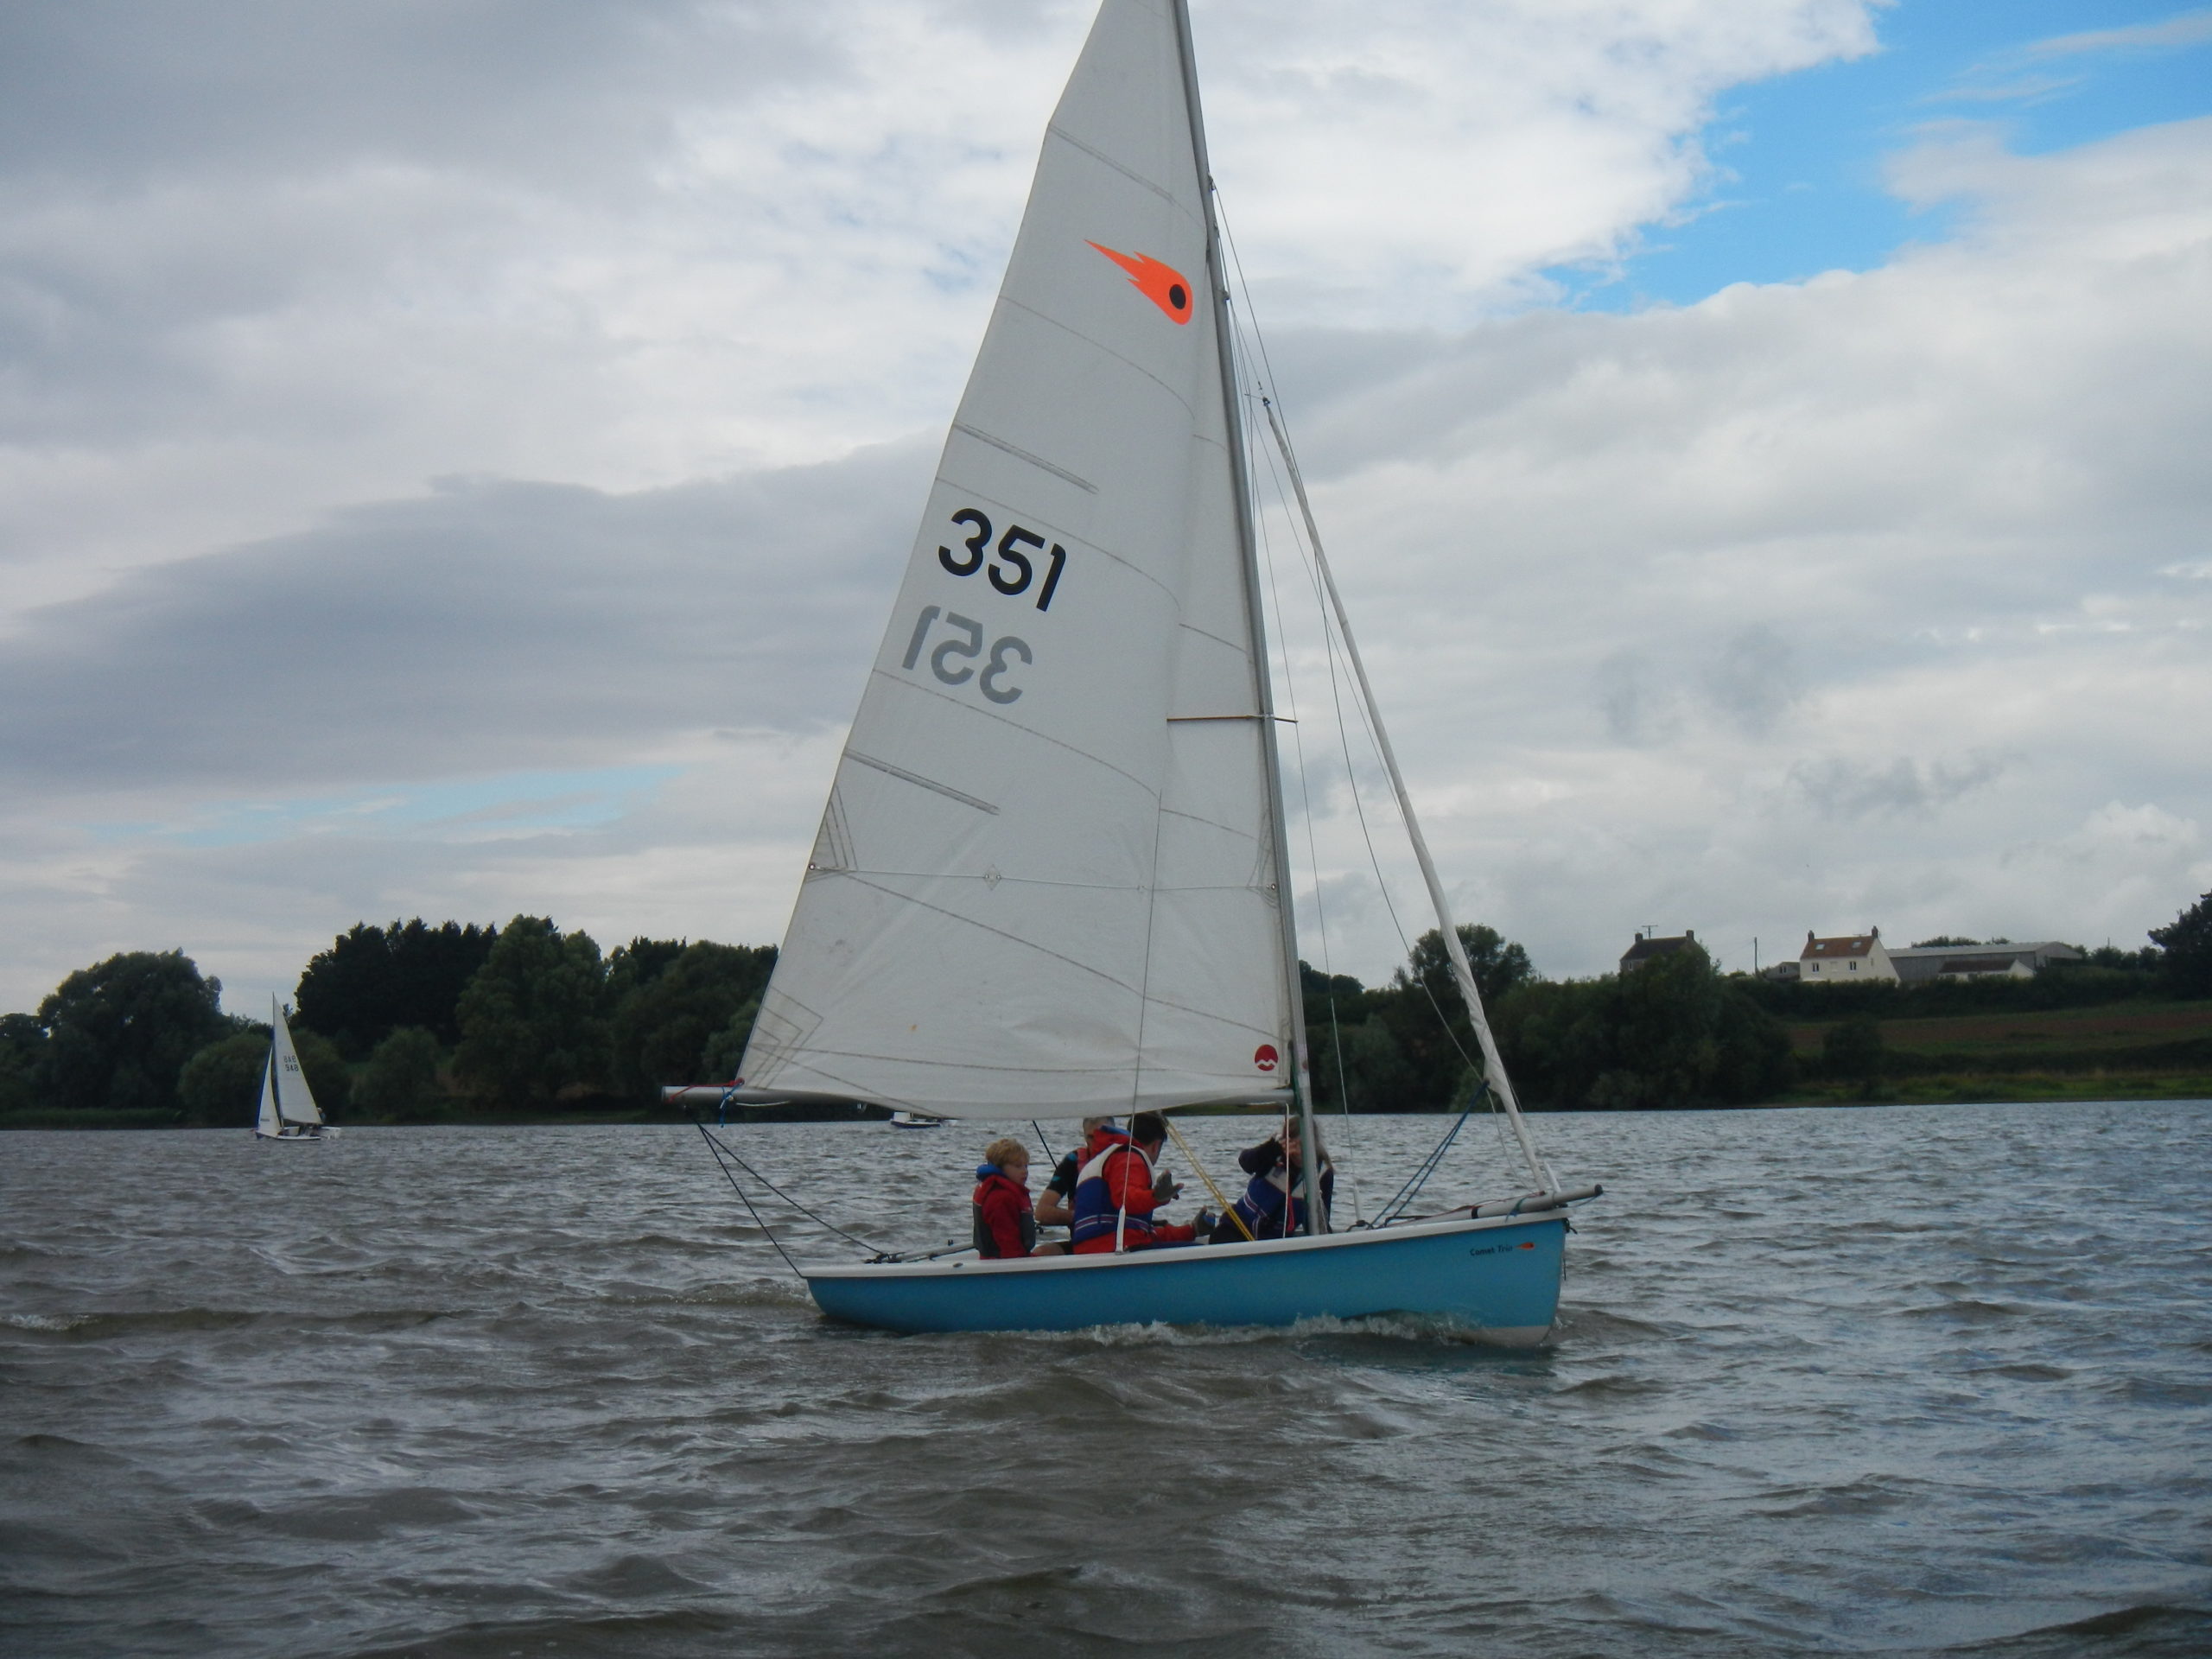 Nick taking a young family out for a taster sail, they really enjoyed it